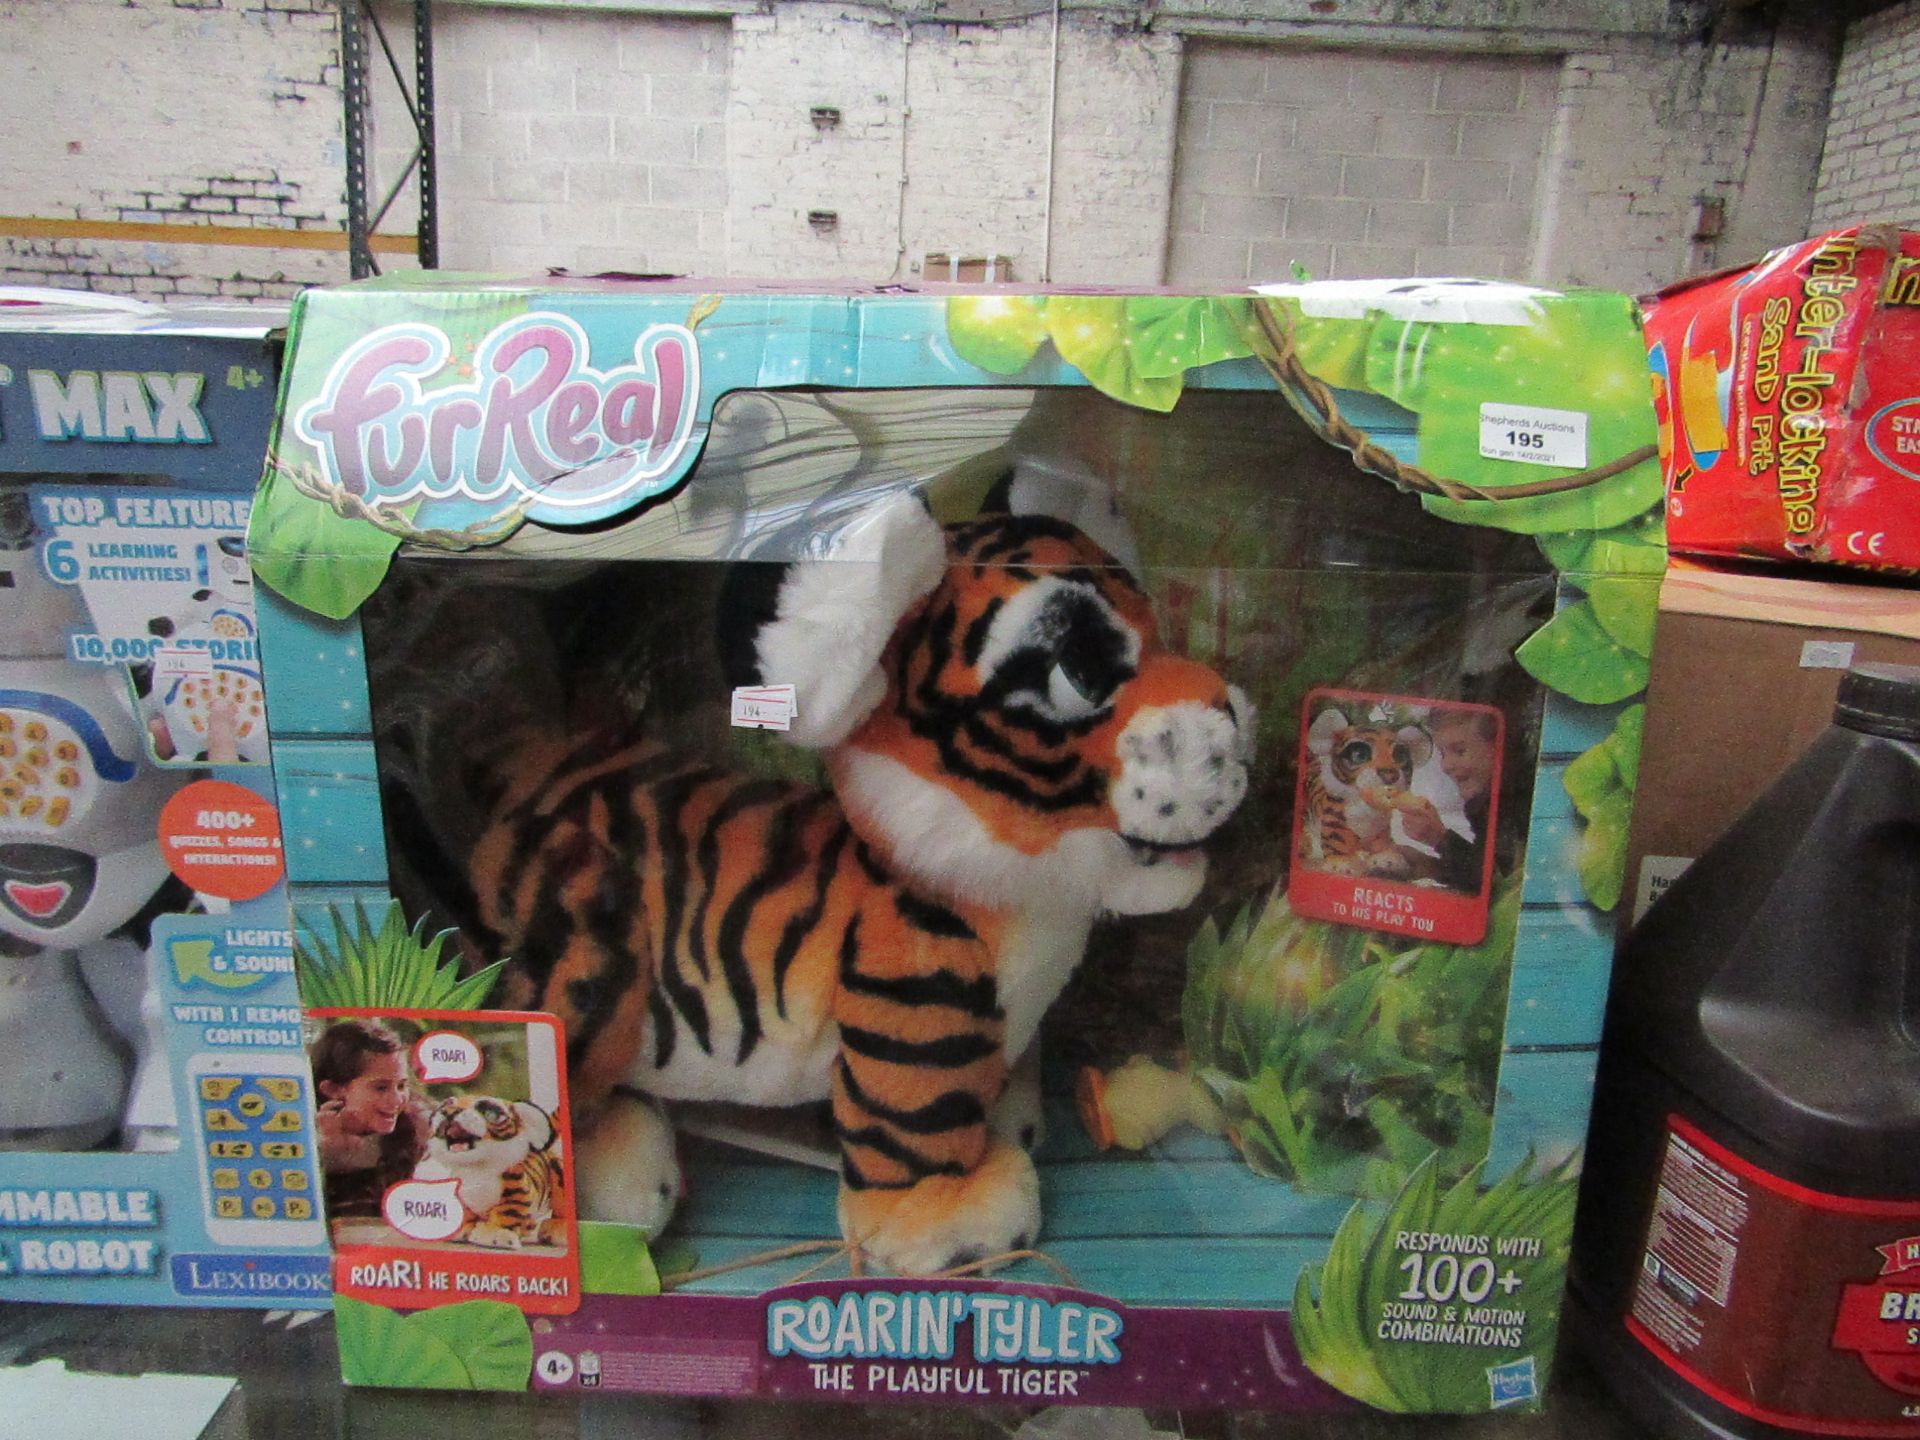 1 x Fur Real  Roaring Tyler The Playful Tiger packaged unchecked